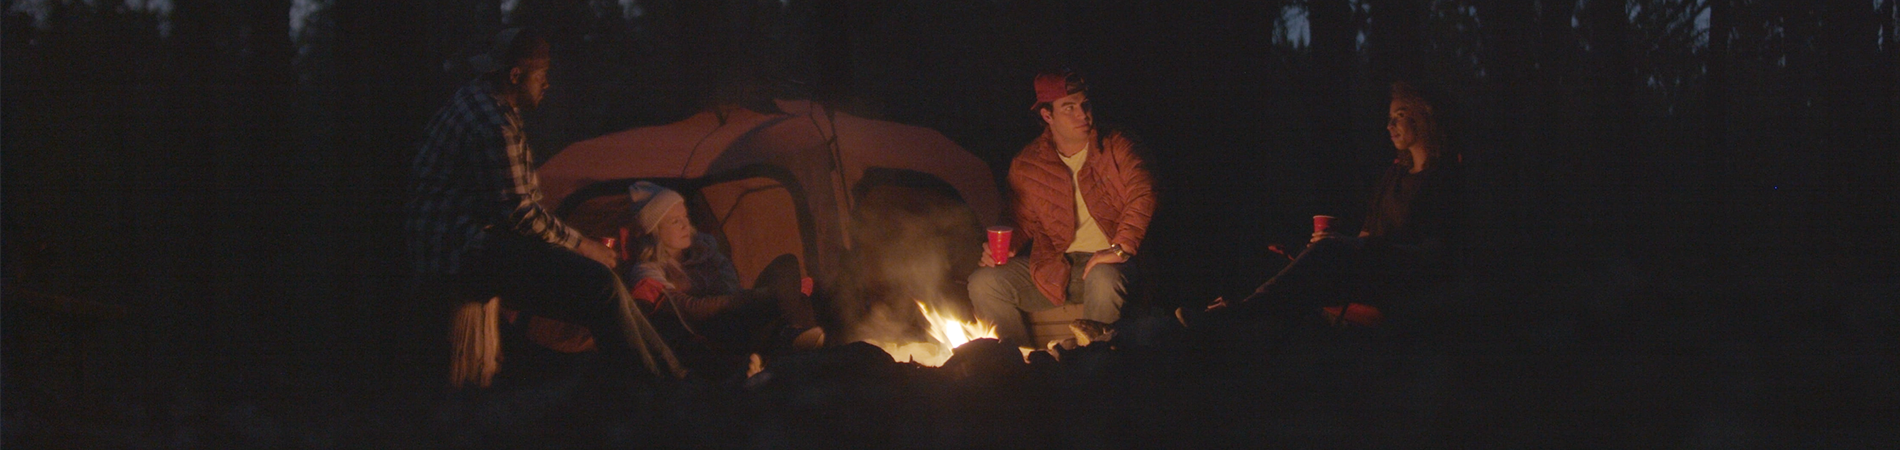 Friends sitting around a campfire together